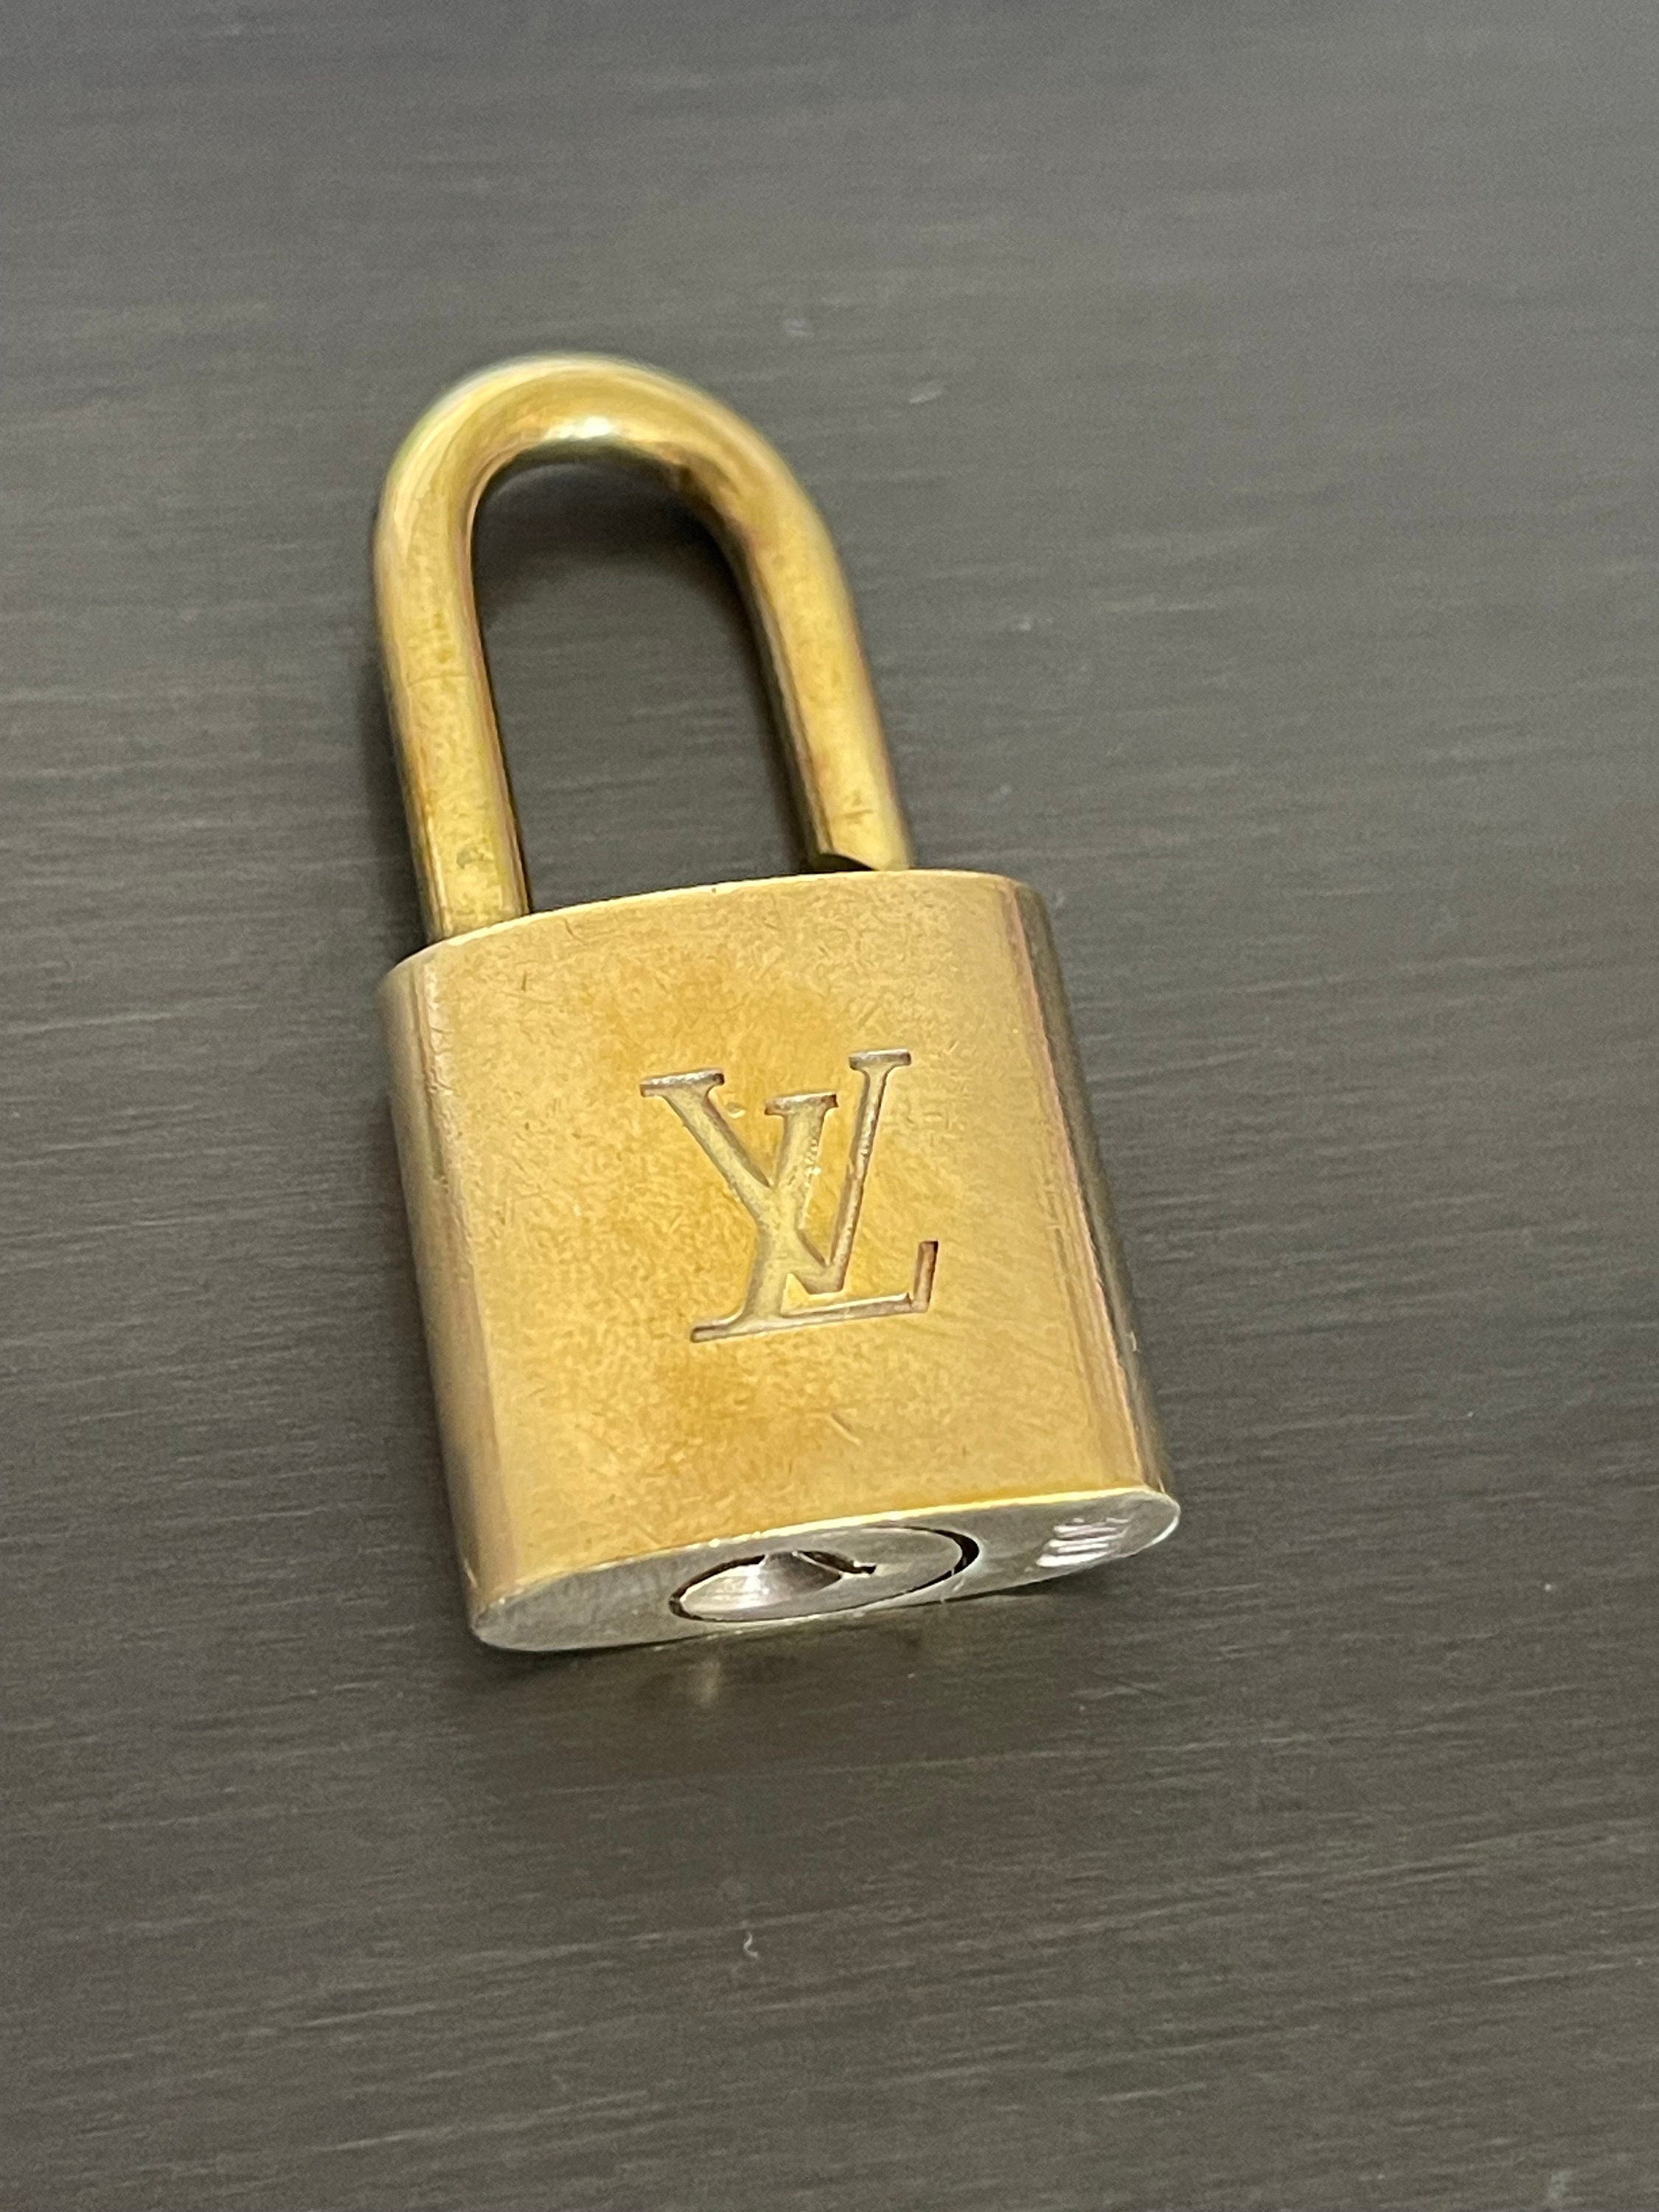 LOUIS VUITTON AUTH BRASS #307 LOCK KEY PADLOCK- POLISHED! Fits all bags! USA